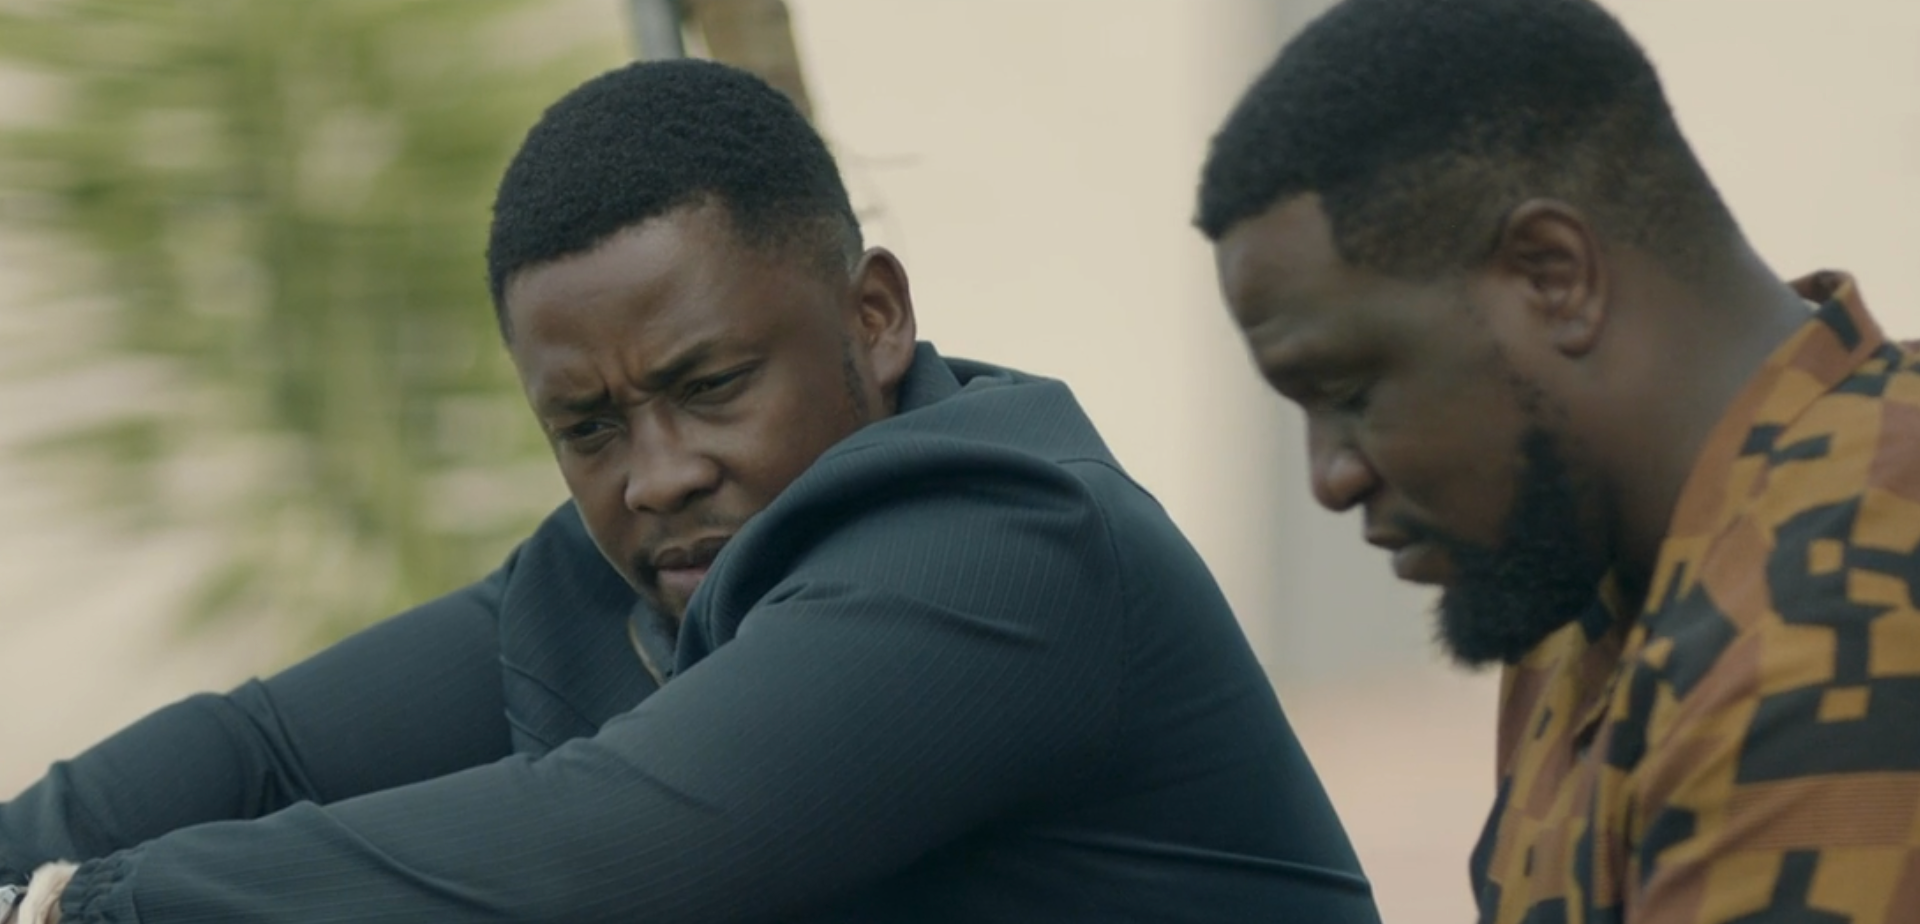 Mqhele comforting his brother Sambulo in The Wife